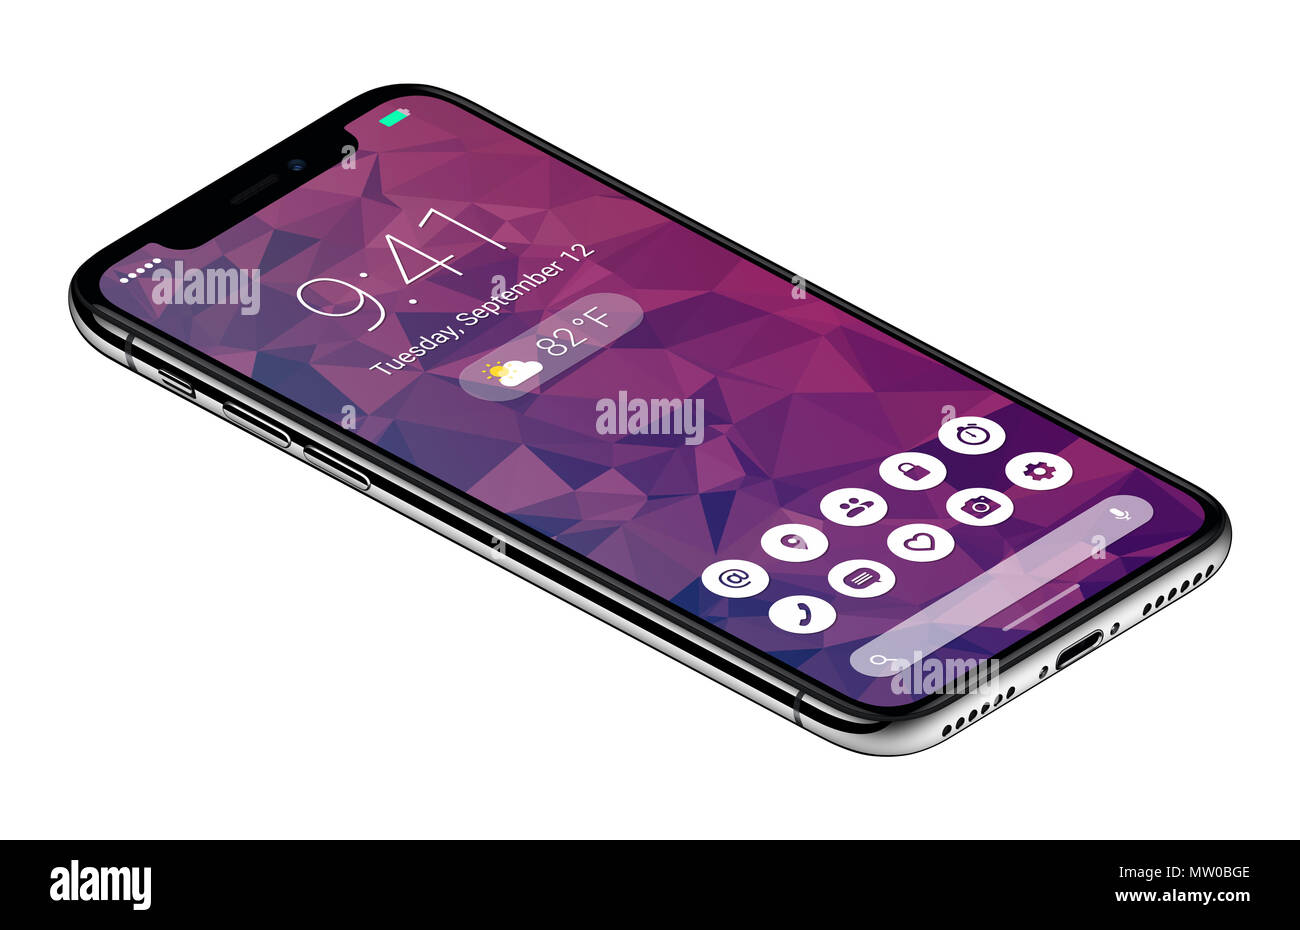 Isometric view frameless smartphone concept with material design flat UI  interface similar to Android P Stock Photo - Alamy